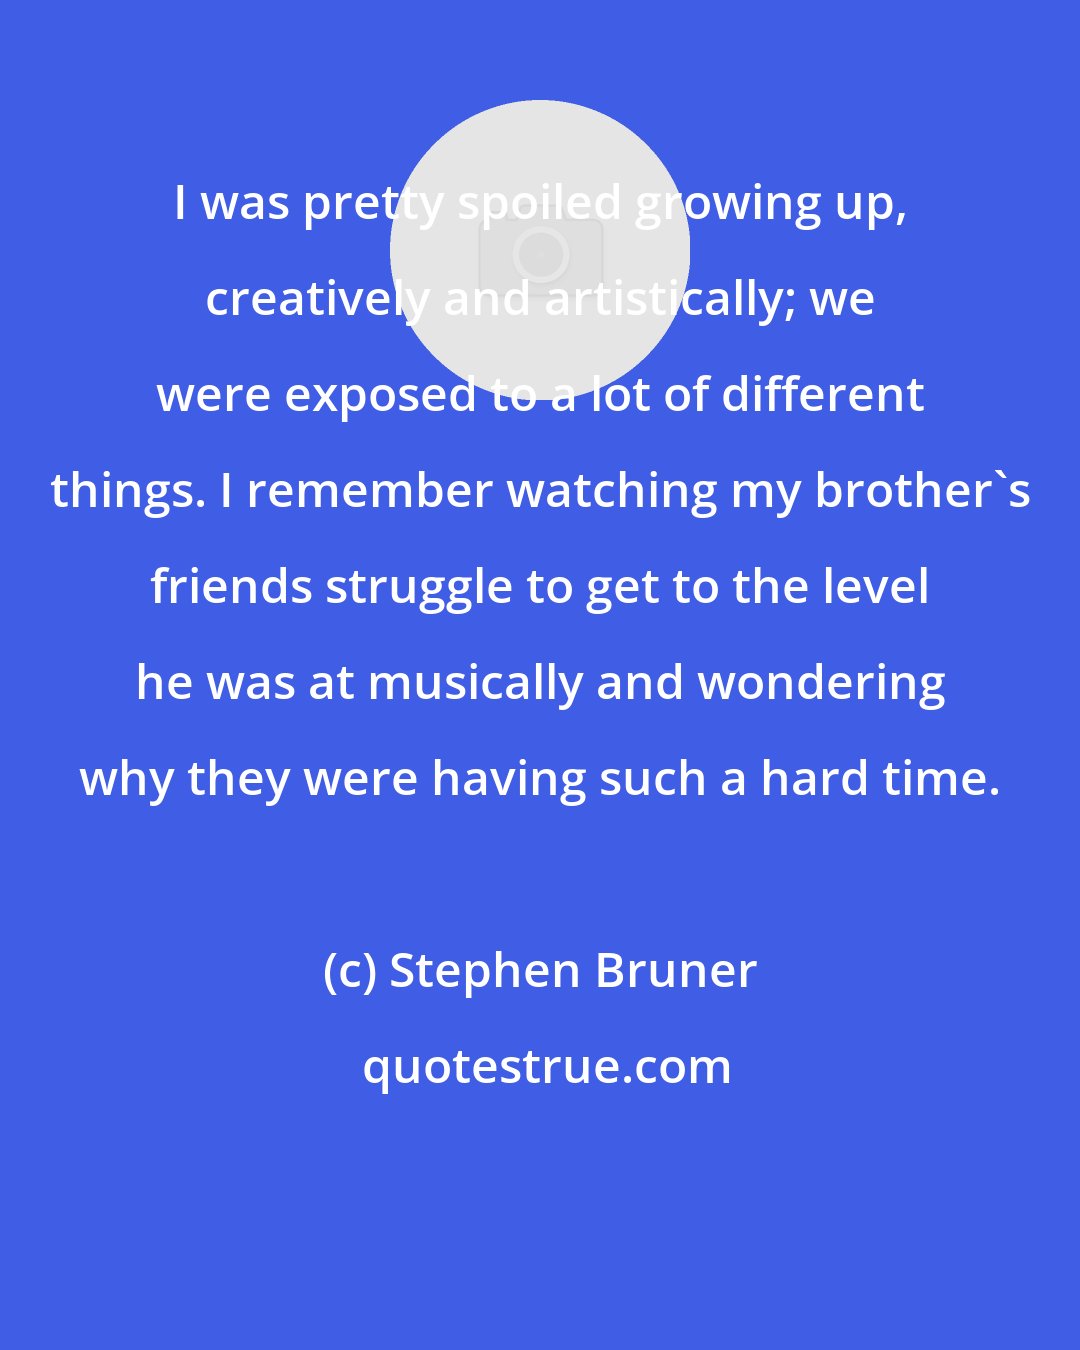 Stephen Bruner: I was pretty spoiled growing up, creatively and artistically; we were exposed to a lot of different things. I remember watching my brother's friends struggle to get to the level he was at musically and wondering why they were having such a hard time.